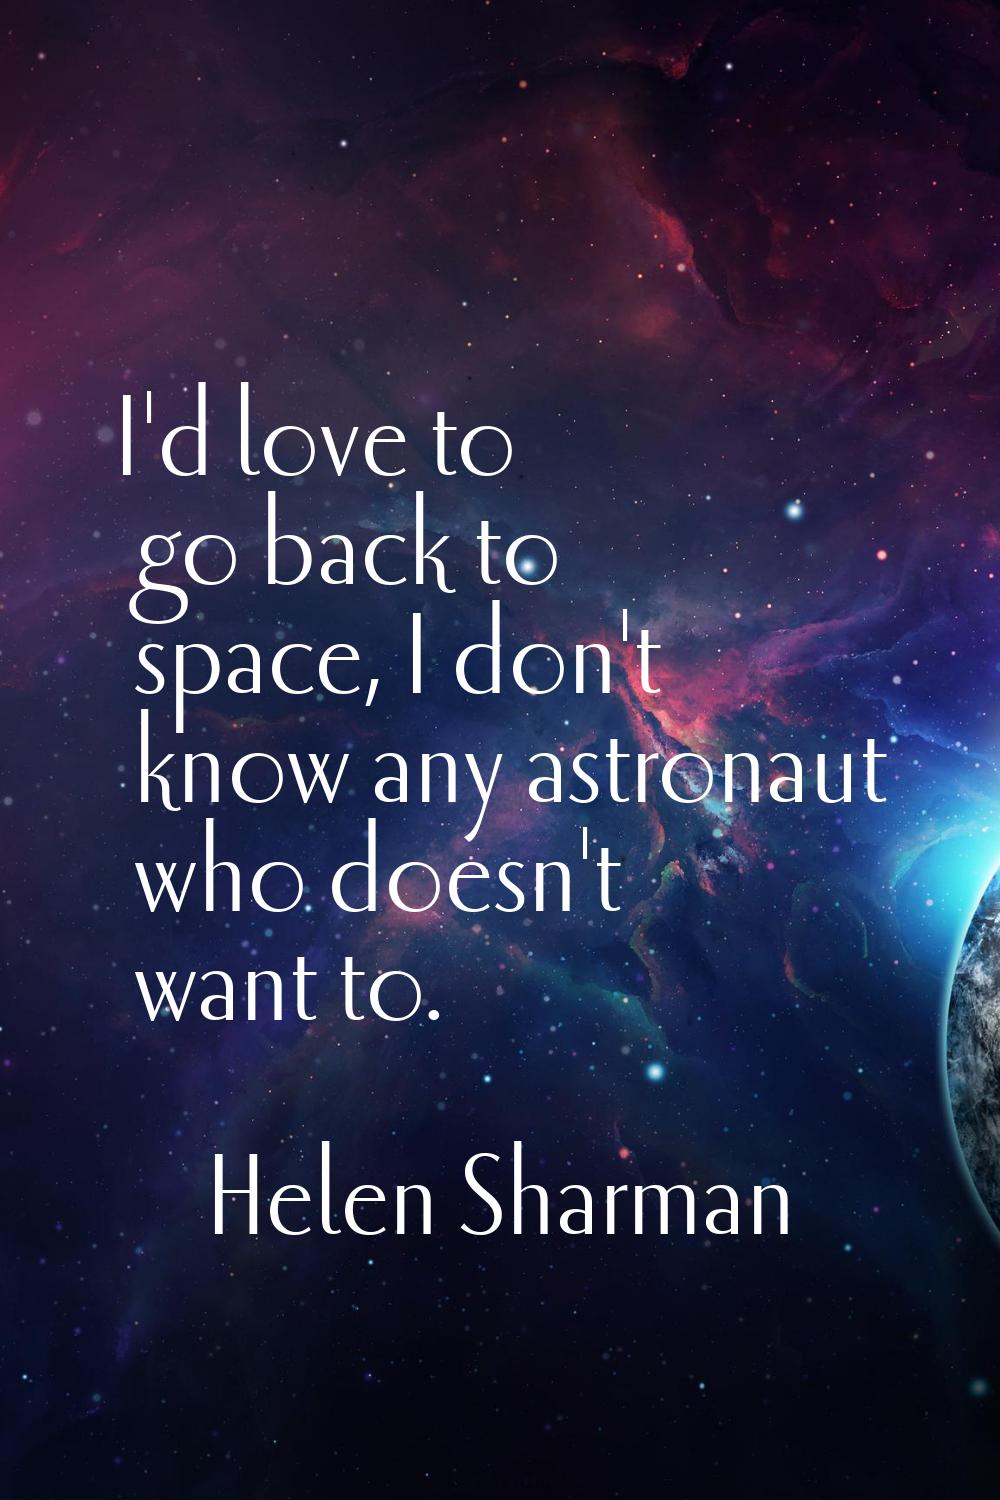 I'd love to go back to space, I don't know any astronaut who doesn't want to.